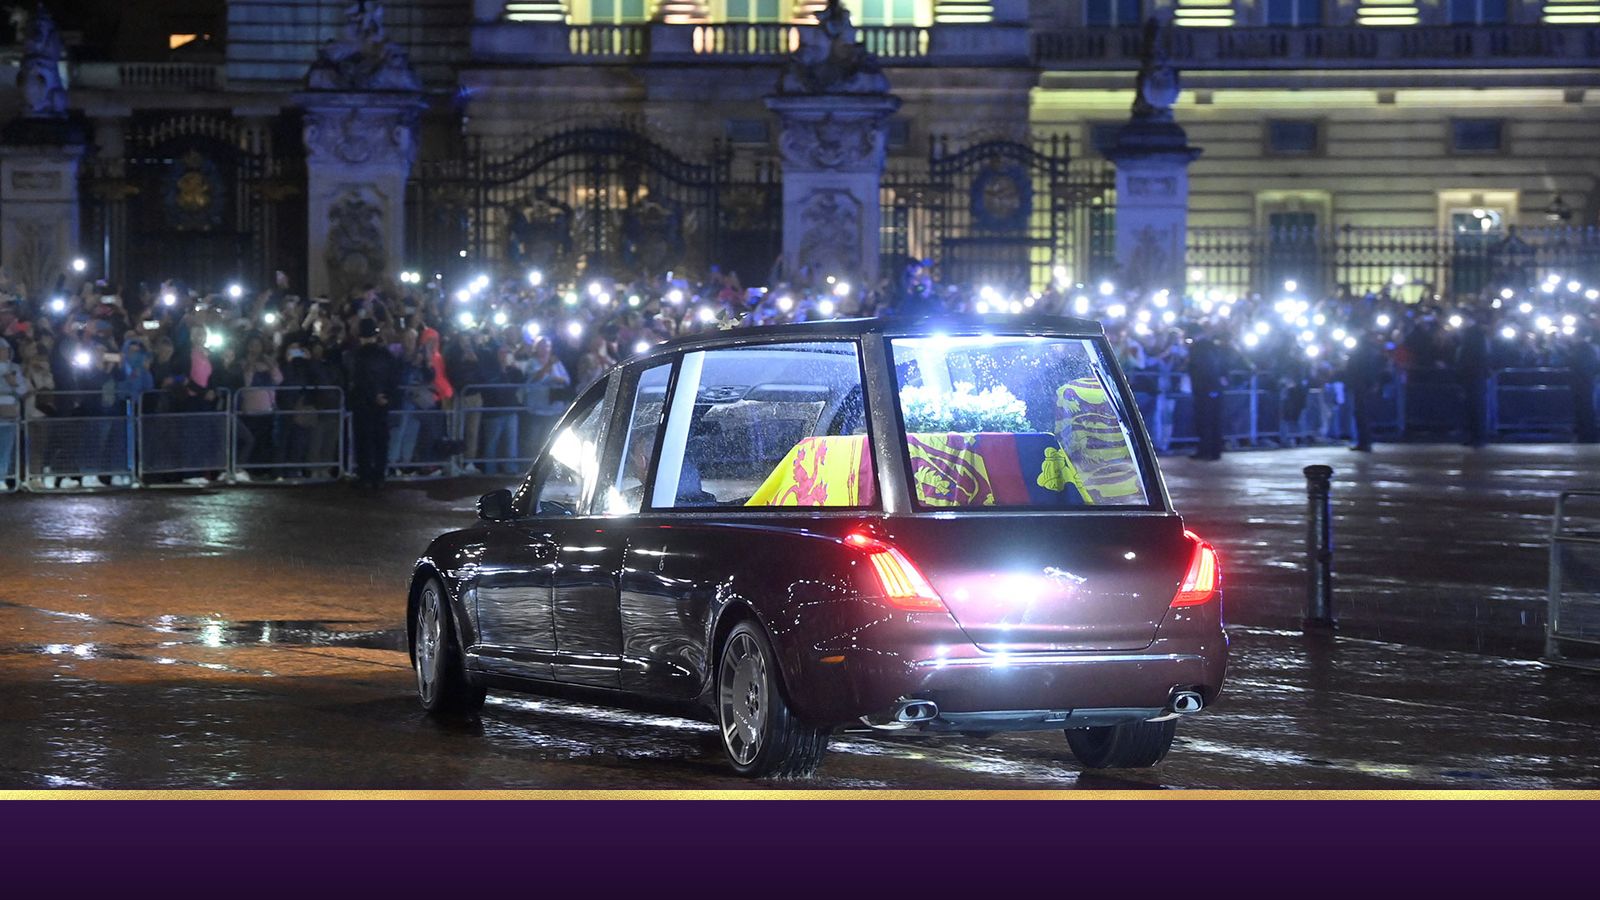 Queens Coffin Arrives At Buckingham Palace As Thousands Cheer Patabook News 